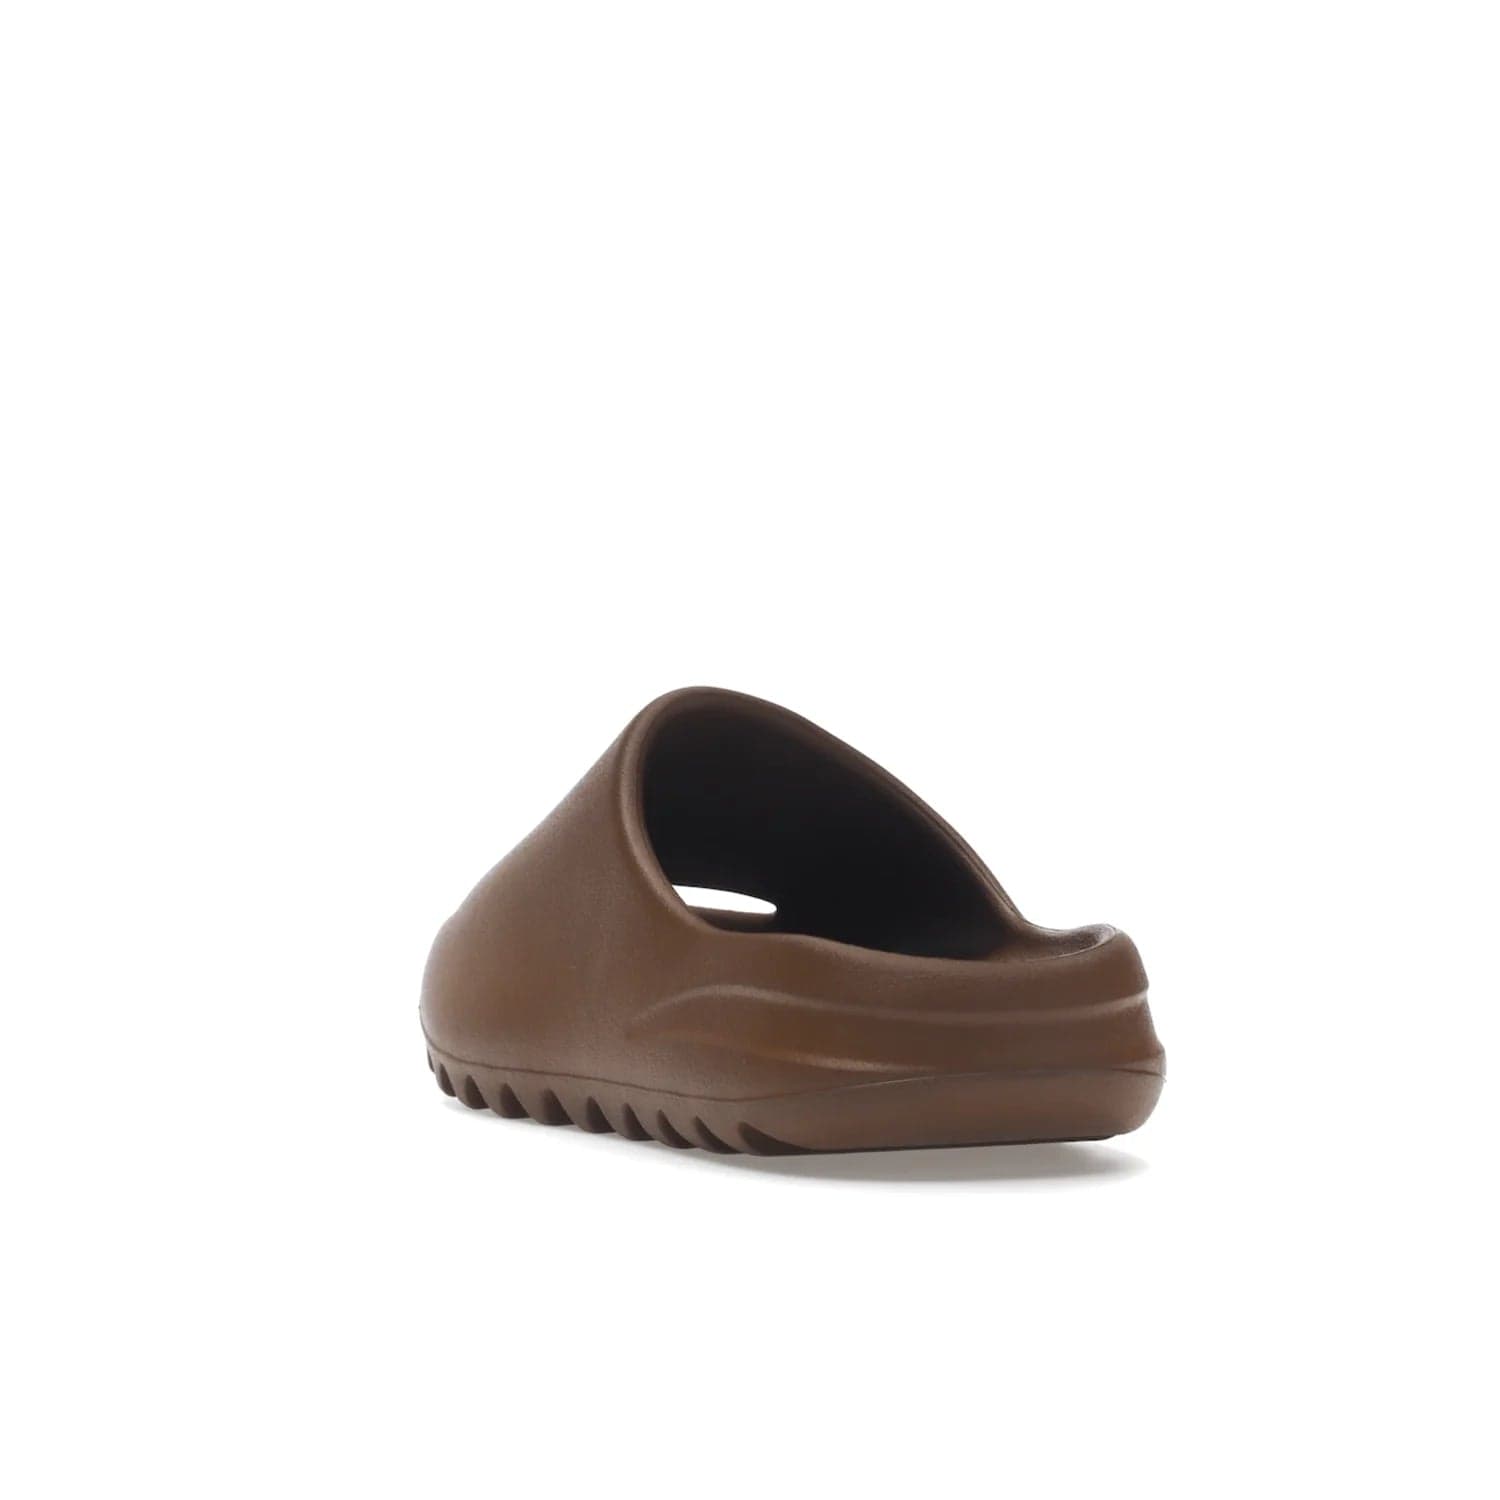 adidas Yeezy Slide Flax - Image 26 - Only at www.BallersClubKickz.com - Score the perfect casual look with the adidas Yeezy Slide Flax. Made with lightweight injected EVA plus horizontal grooves underfoot for traction. Release on August 22, 2022. $70.